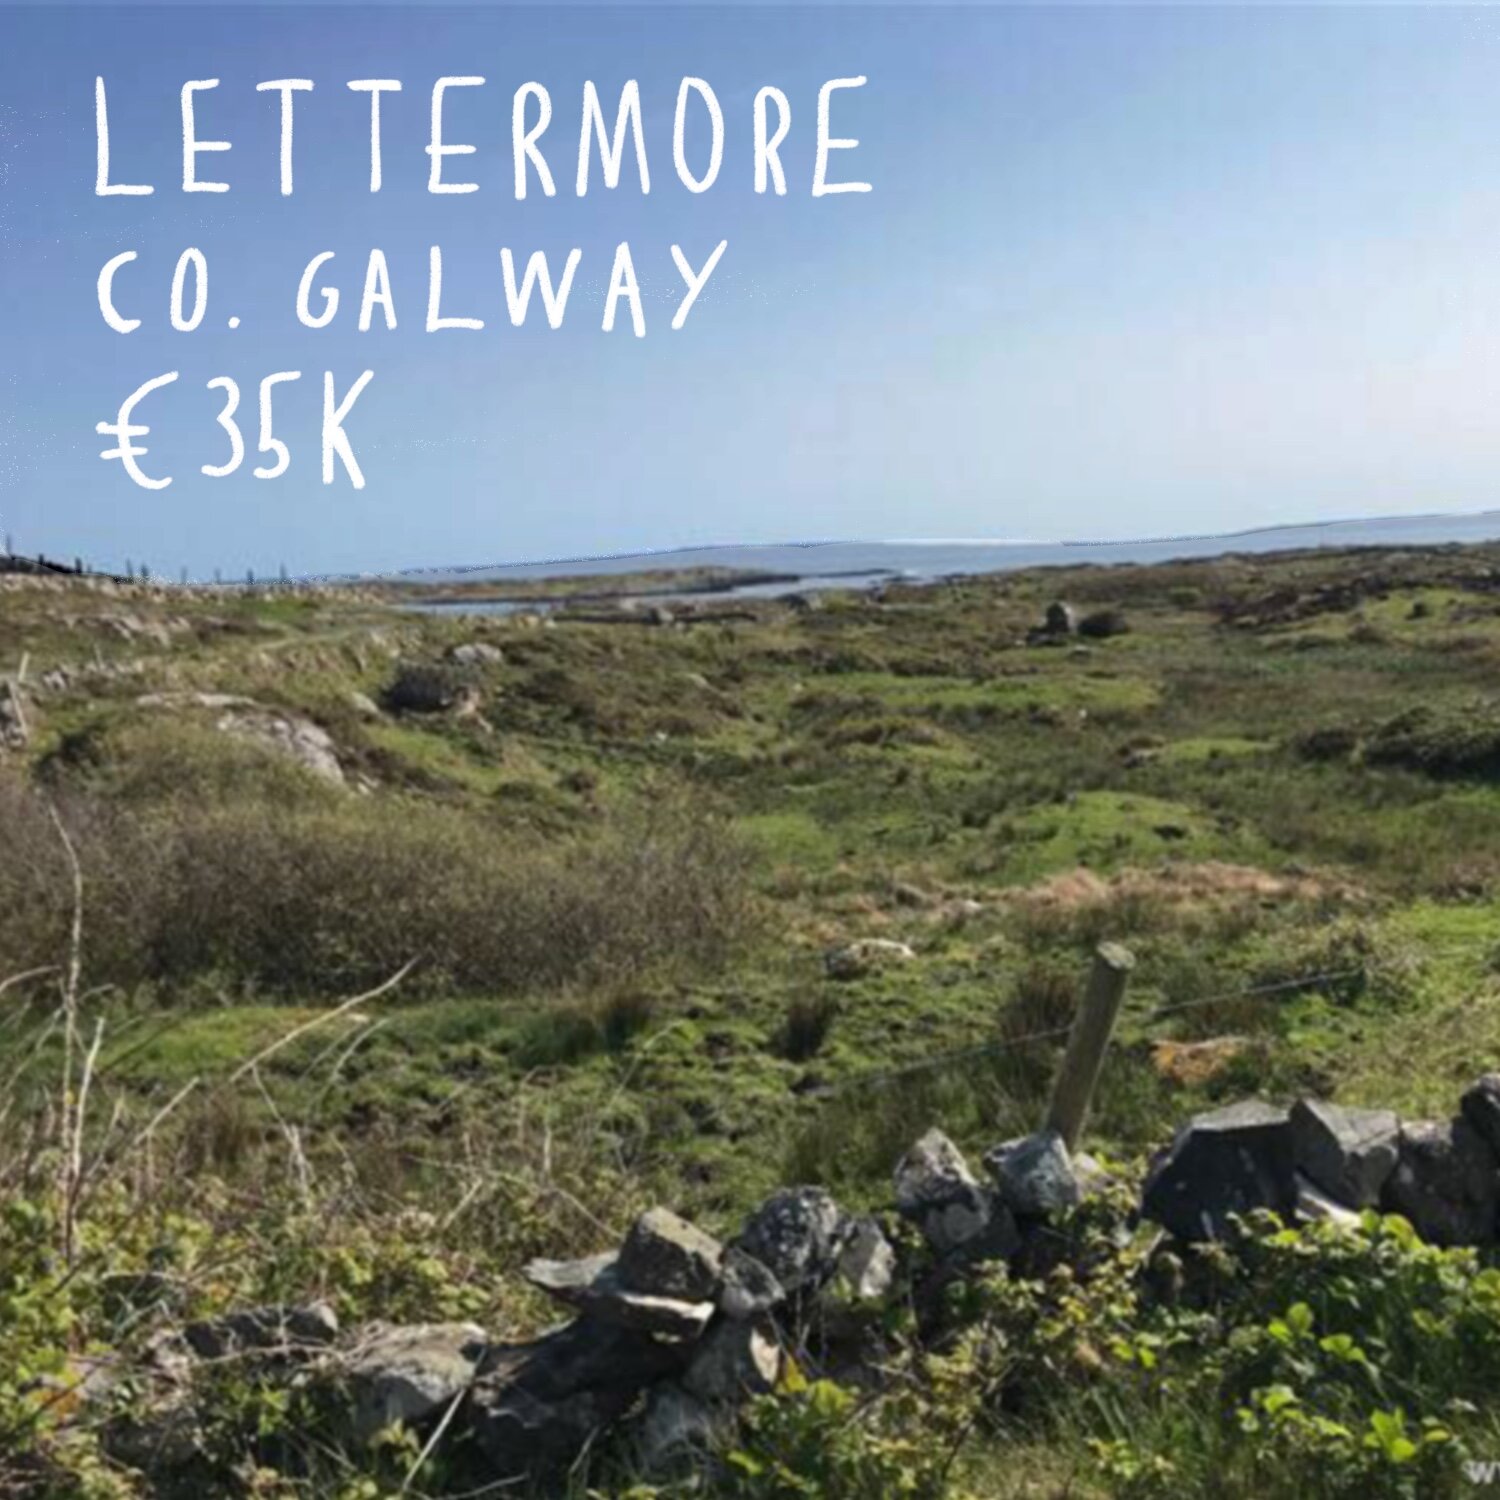 Pouleywerin, Lettermore, Co. Galway. €35k